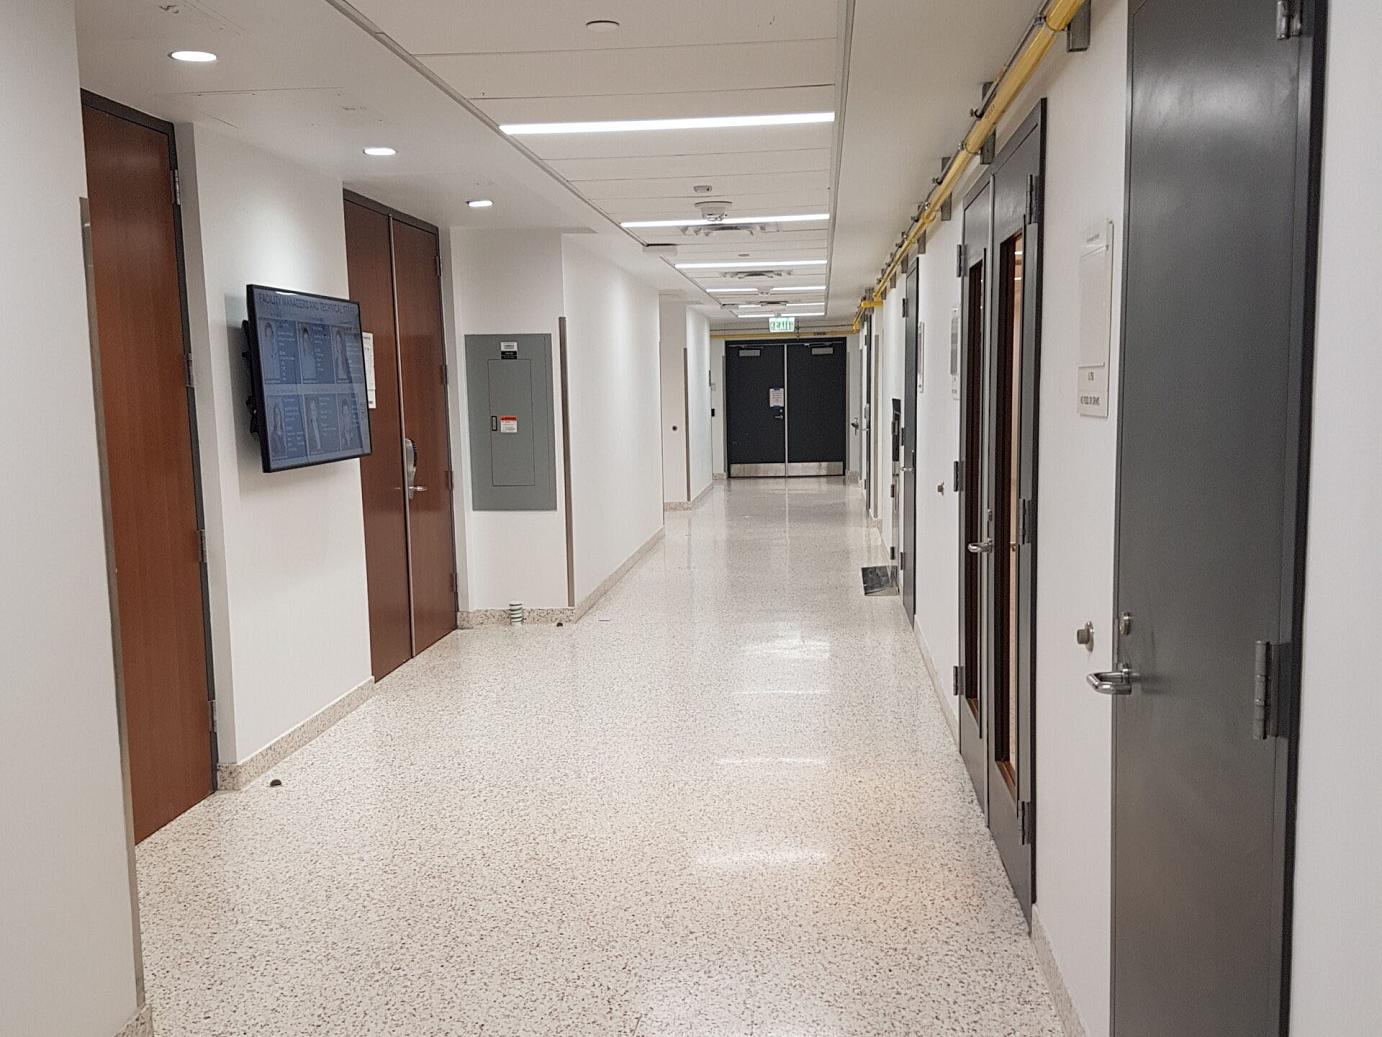 entrance to electron microscopy facility inside engineering education and research center